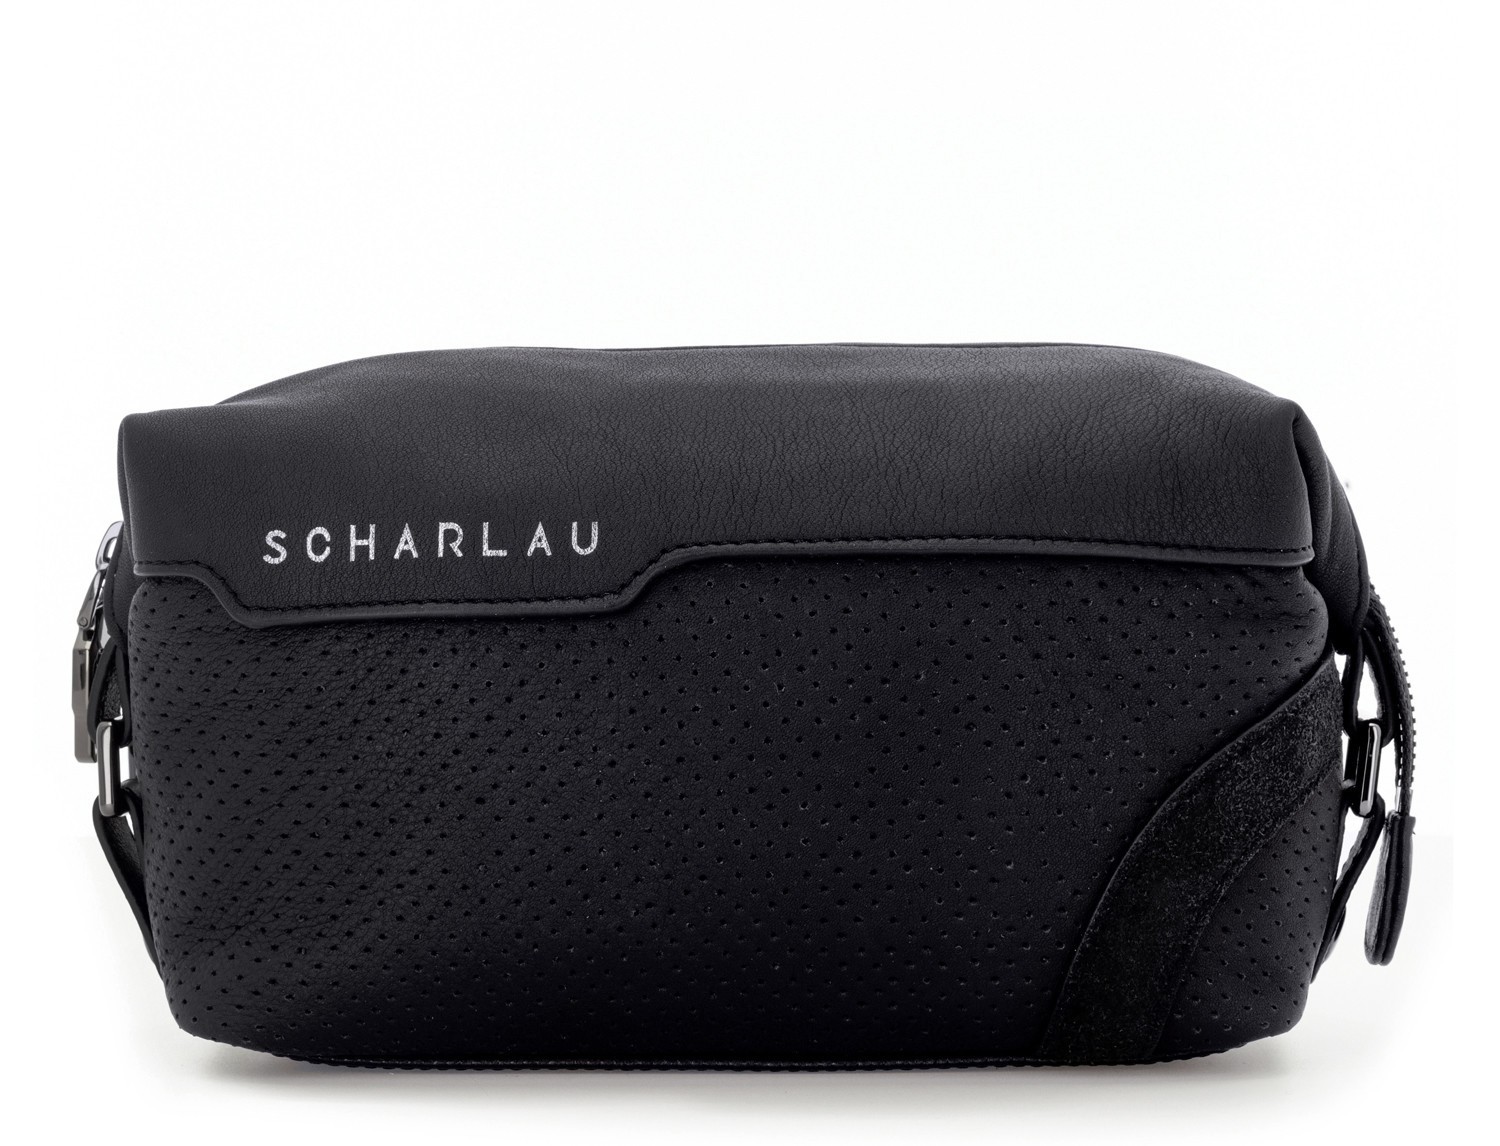 Leather small toiletry bag black front